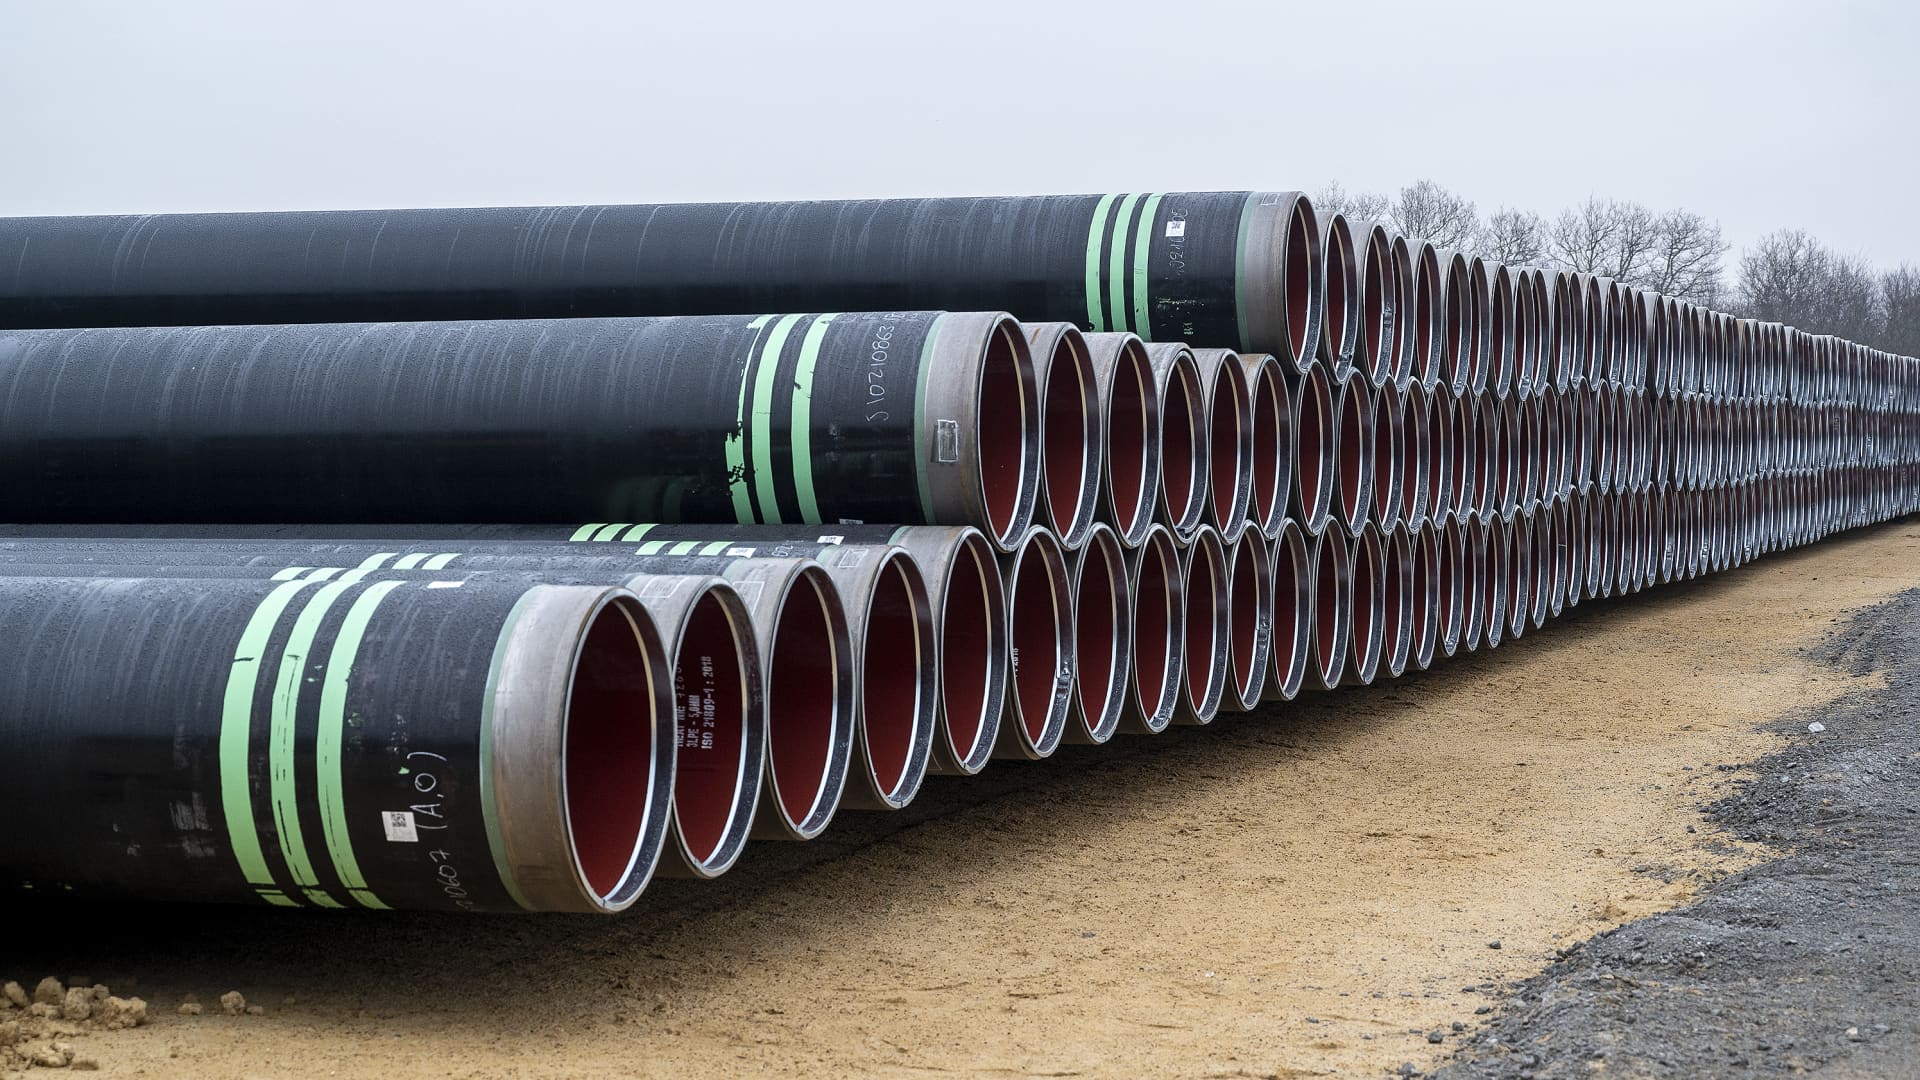 Pipes for the Baltic Pipe gas pipeline are stacked at Houstrup Strand, near Noerre Nebel, Jutland, Denmark, on February 23, 2021. The Baltic Pipe gas pipeline, which is to come ashore at Esbjerg, on the west coast of the Jutland peninsula, will transport ten billion cubic meters of gas every year from the Norwegian gas fields in the North Sea through Denmark and to Poland.